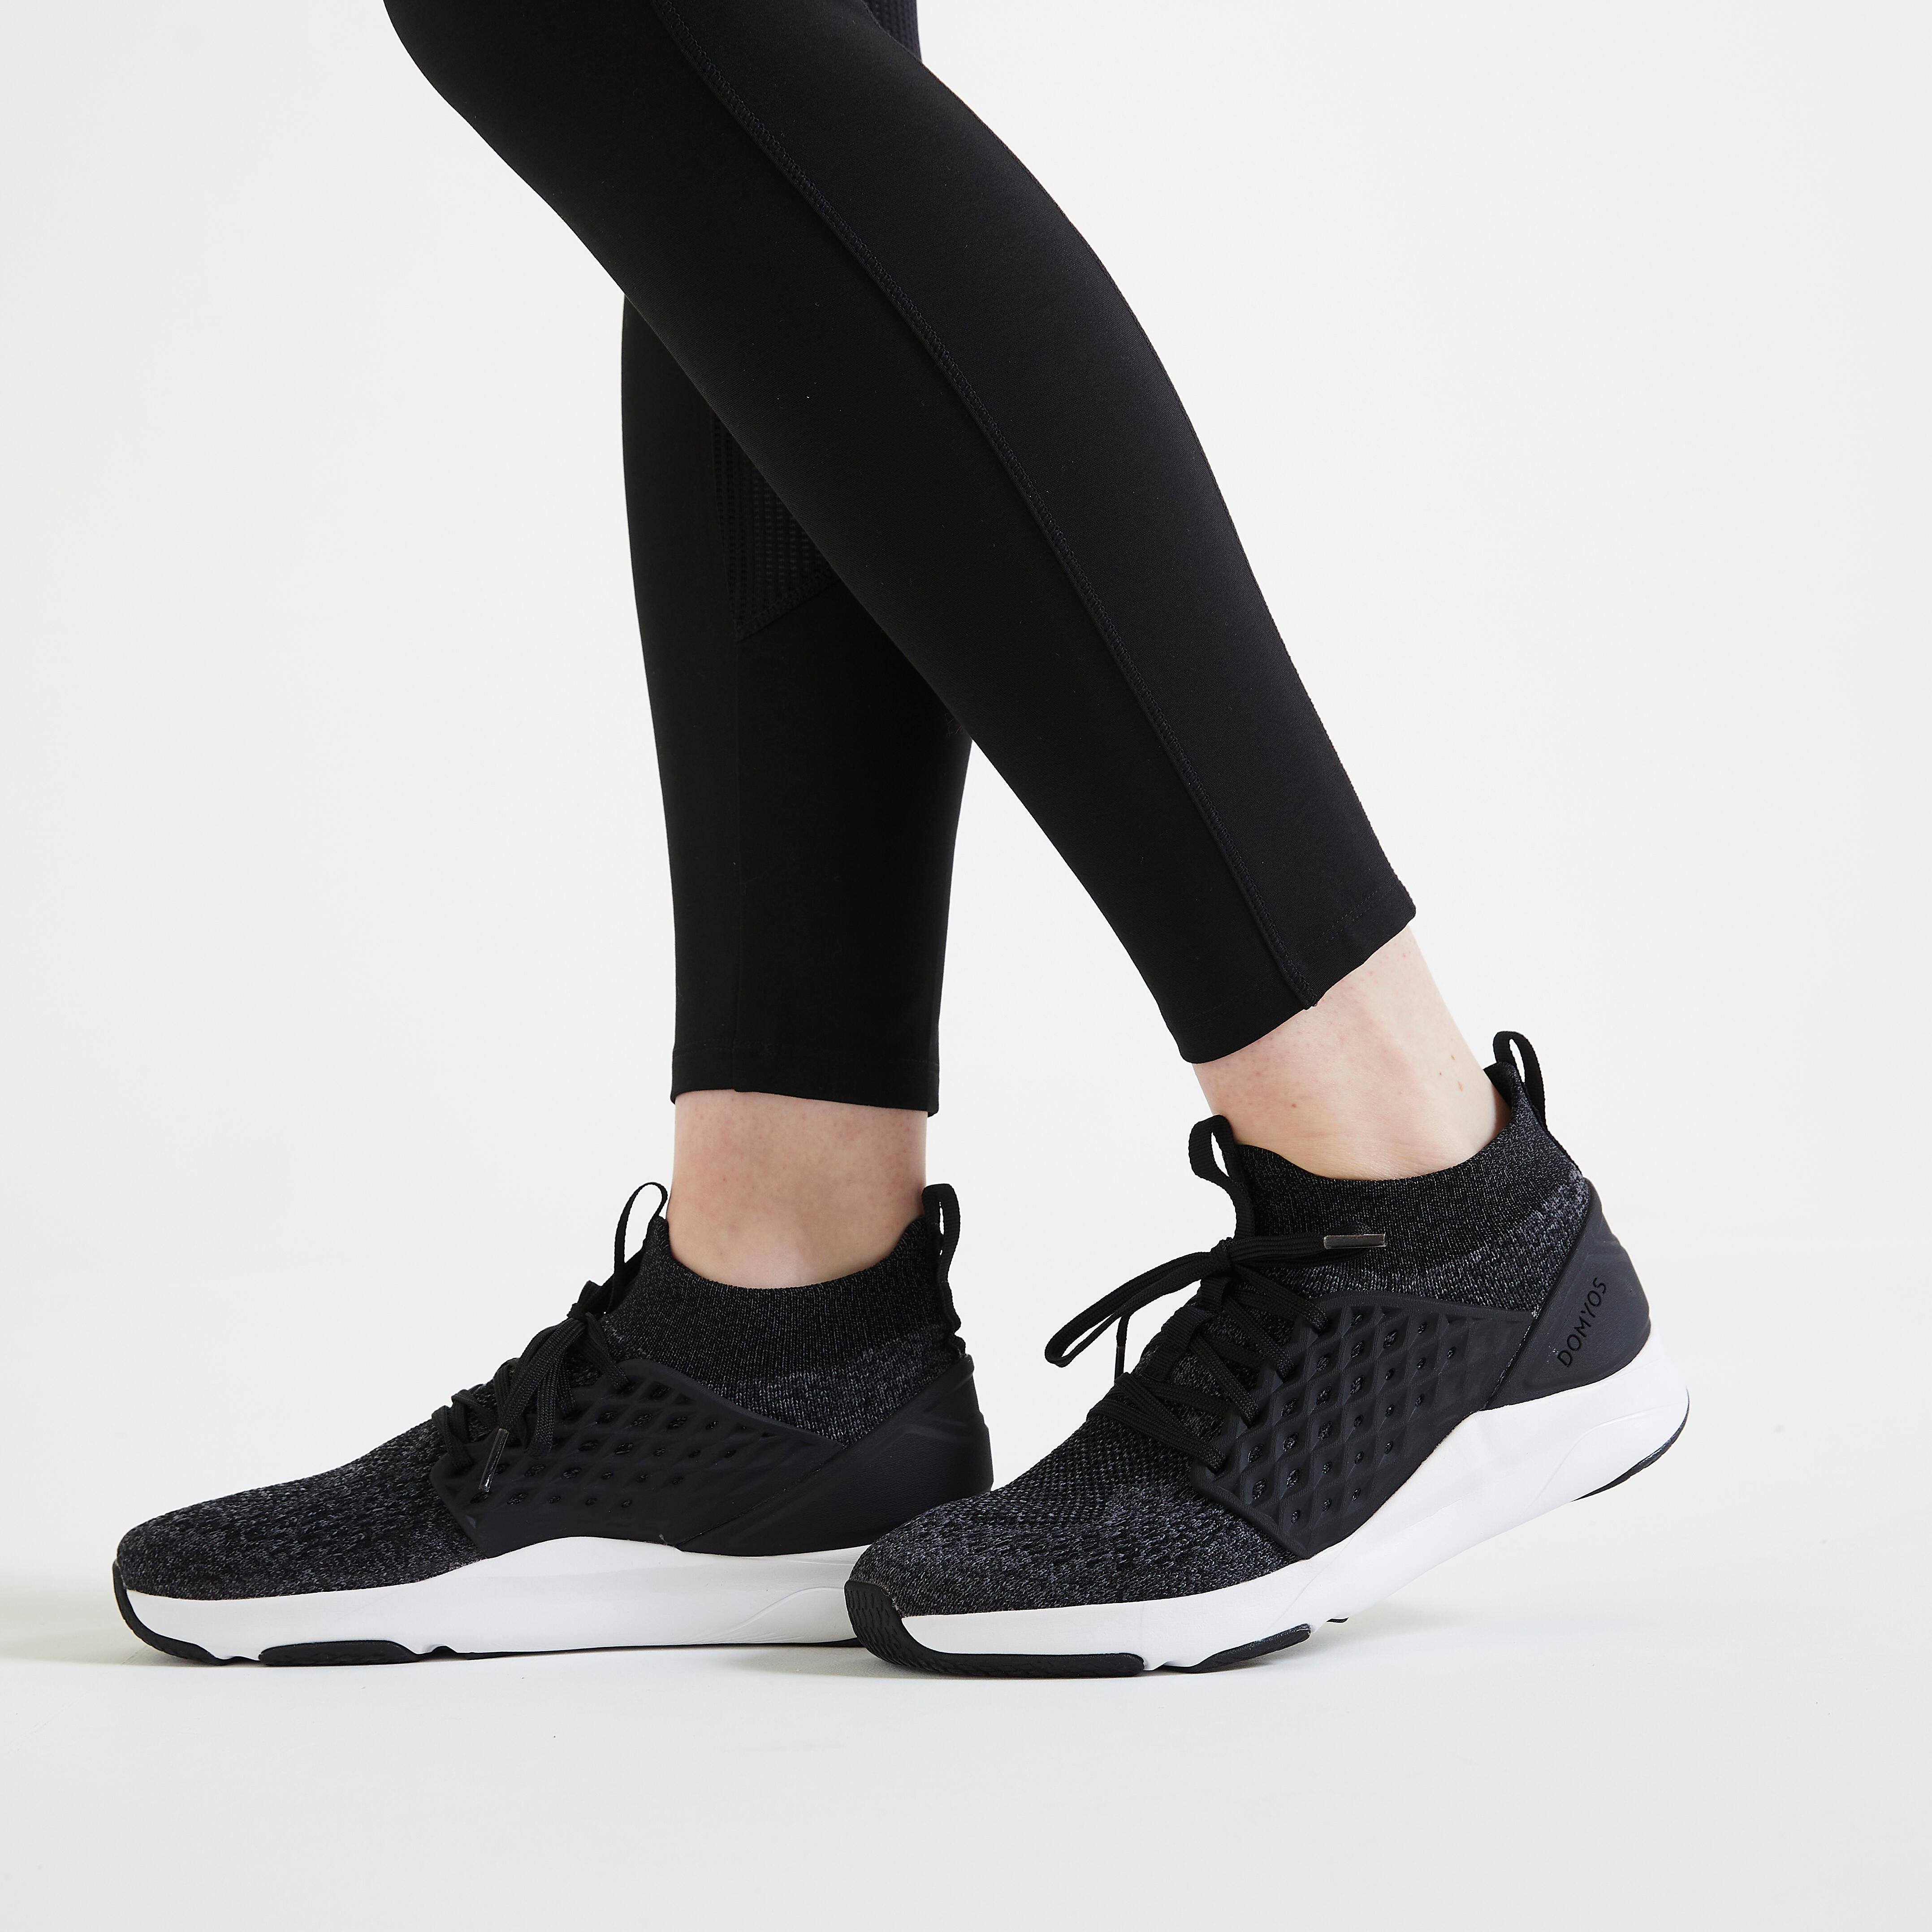 $100 - $150 Running Recycled Polyester Tights & Leggings. Nike.com